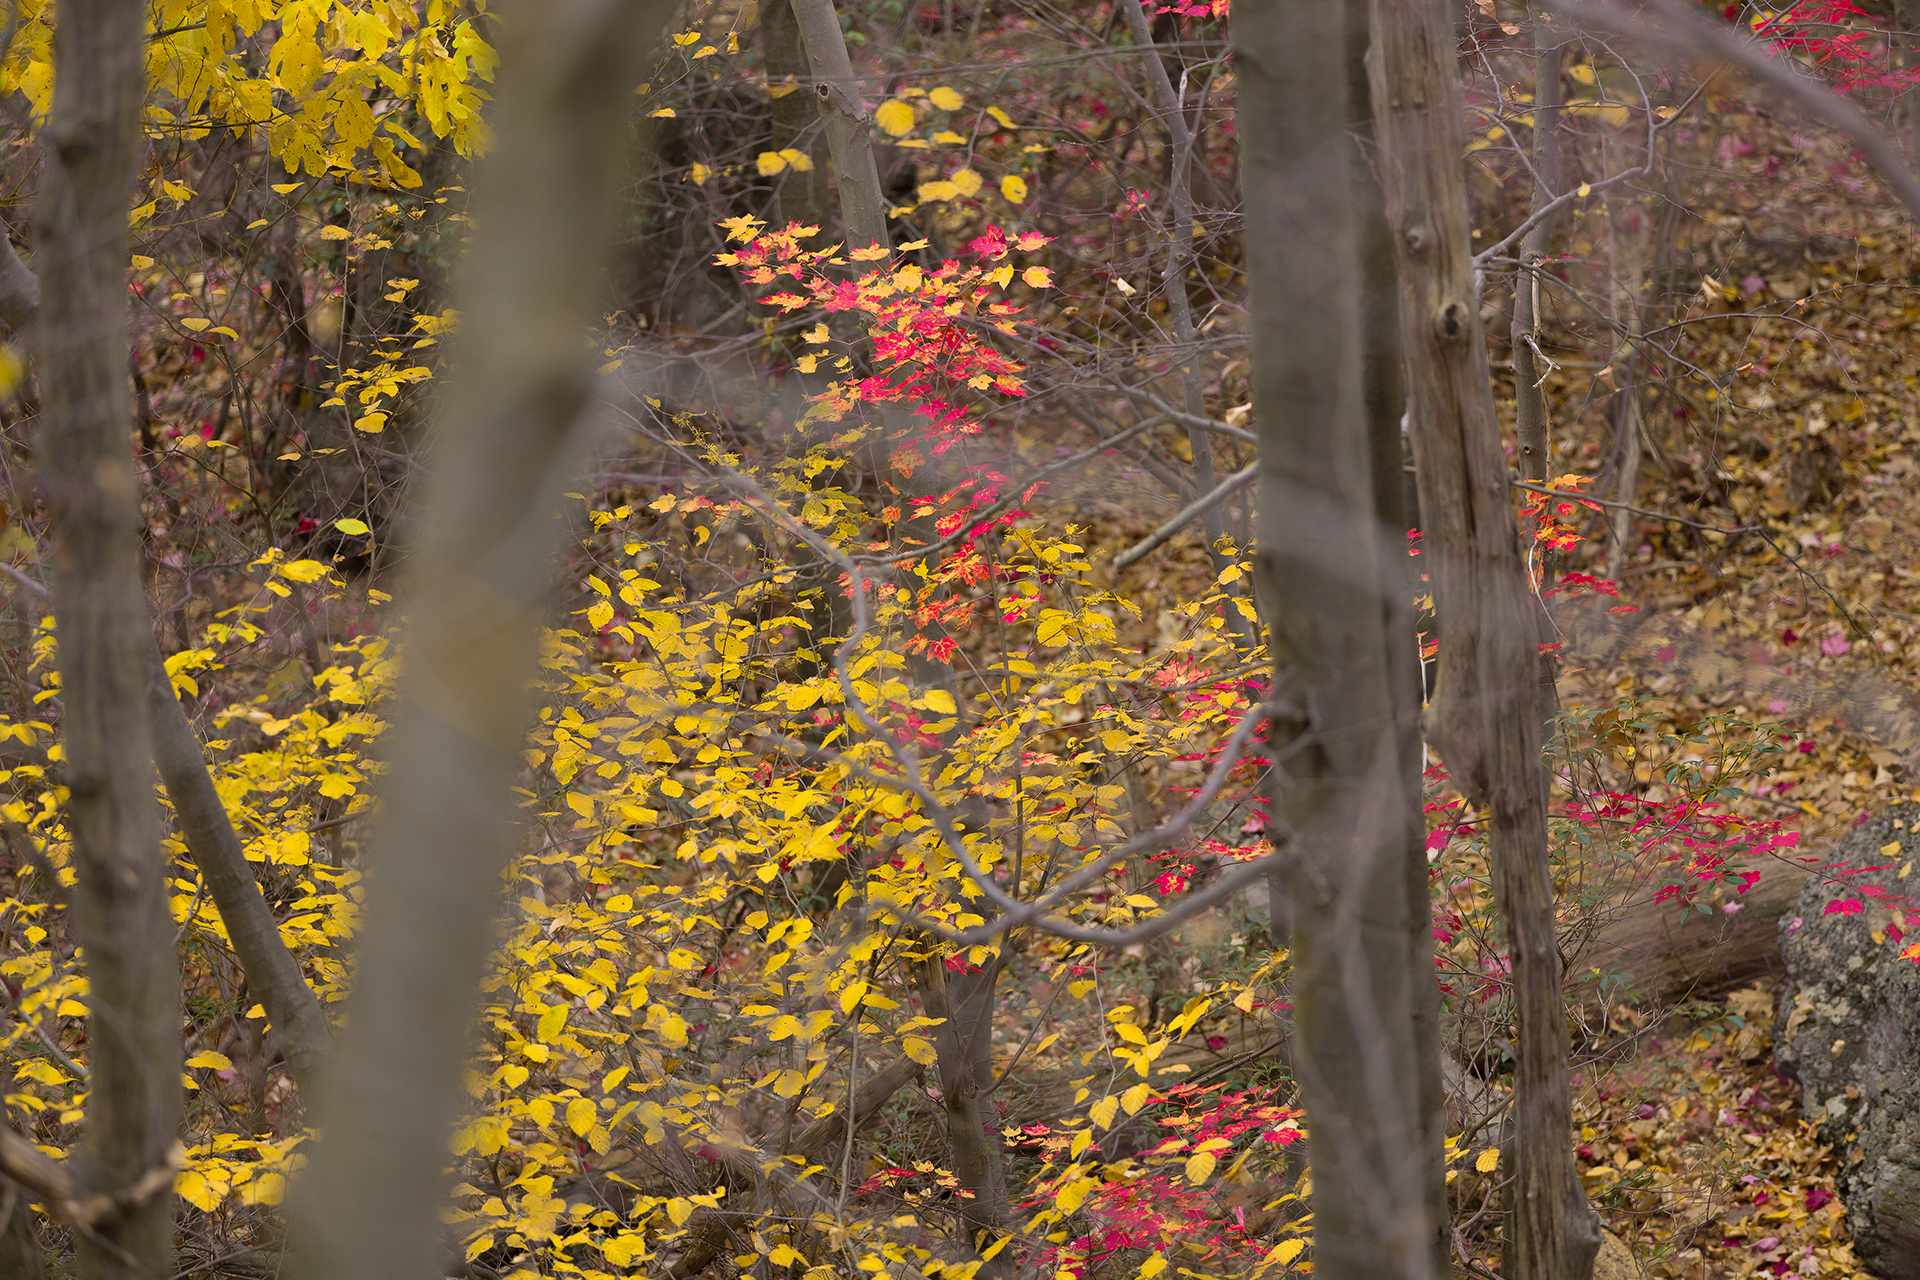 Hudson Valley Hiking: late fall color- only a few leaves left